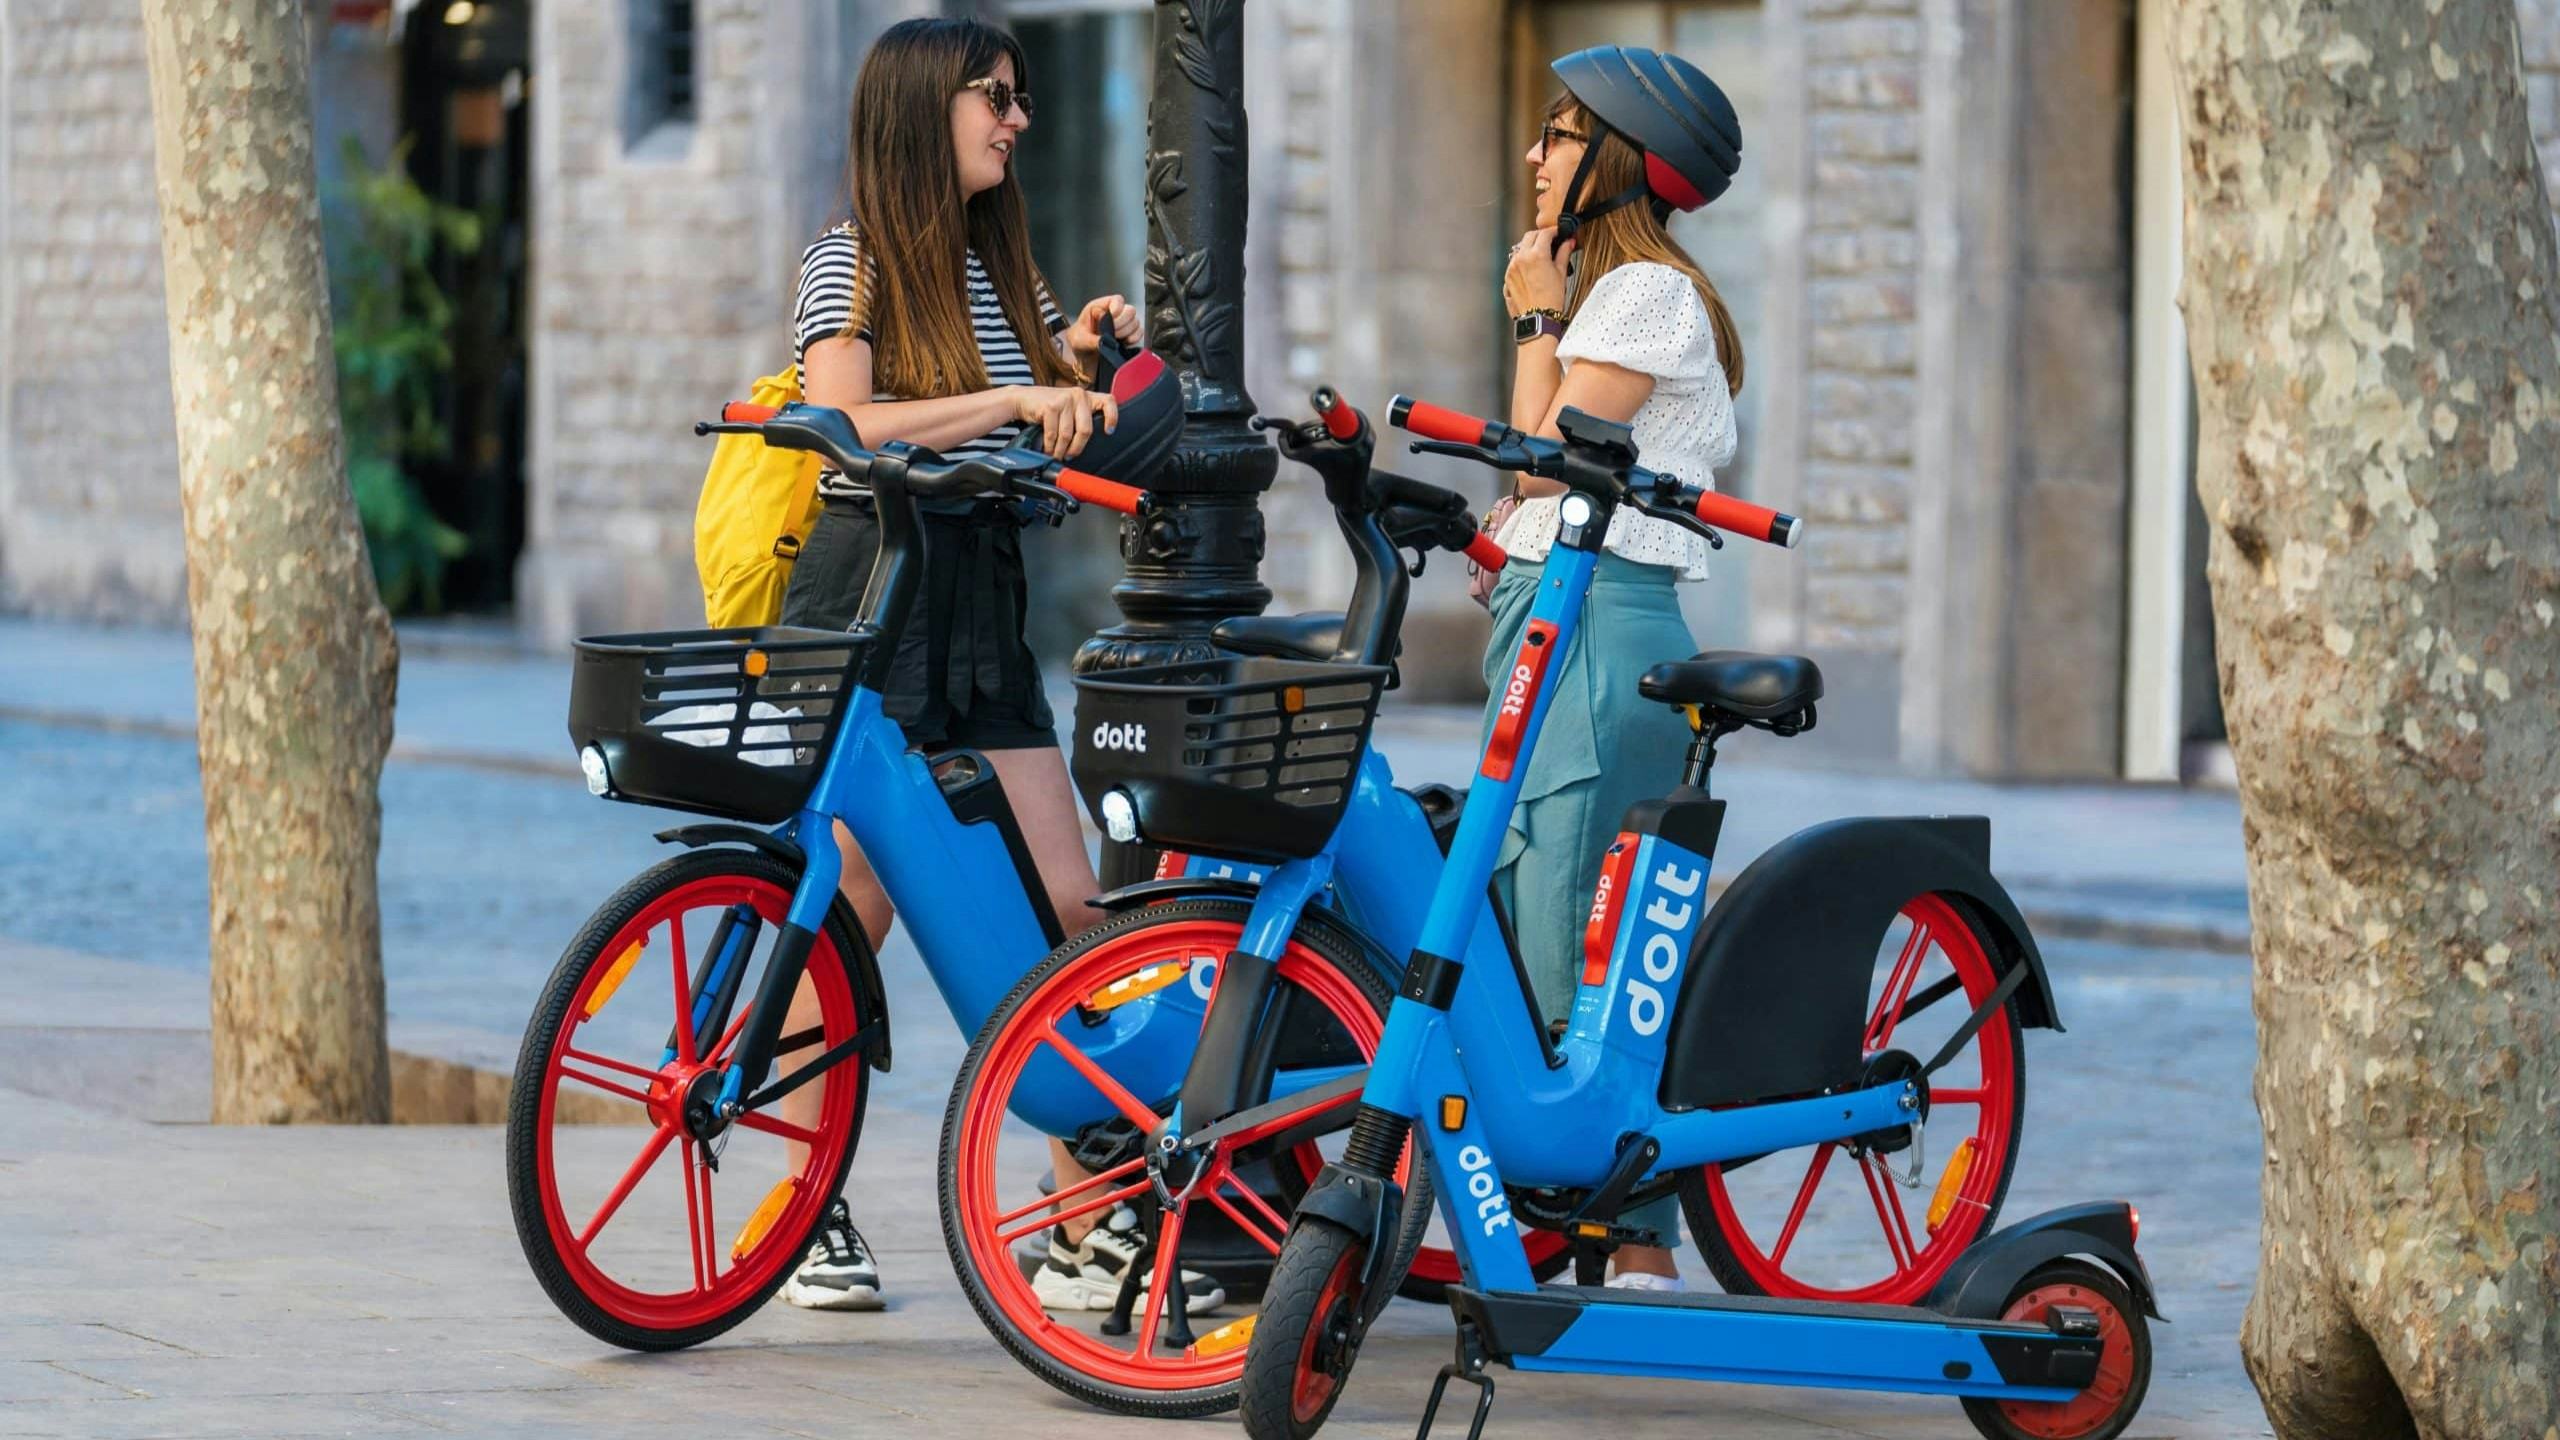 According to the CIE Business Impact Survey the bike share sector was leading in revenue growth last year. – Photo Dott